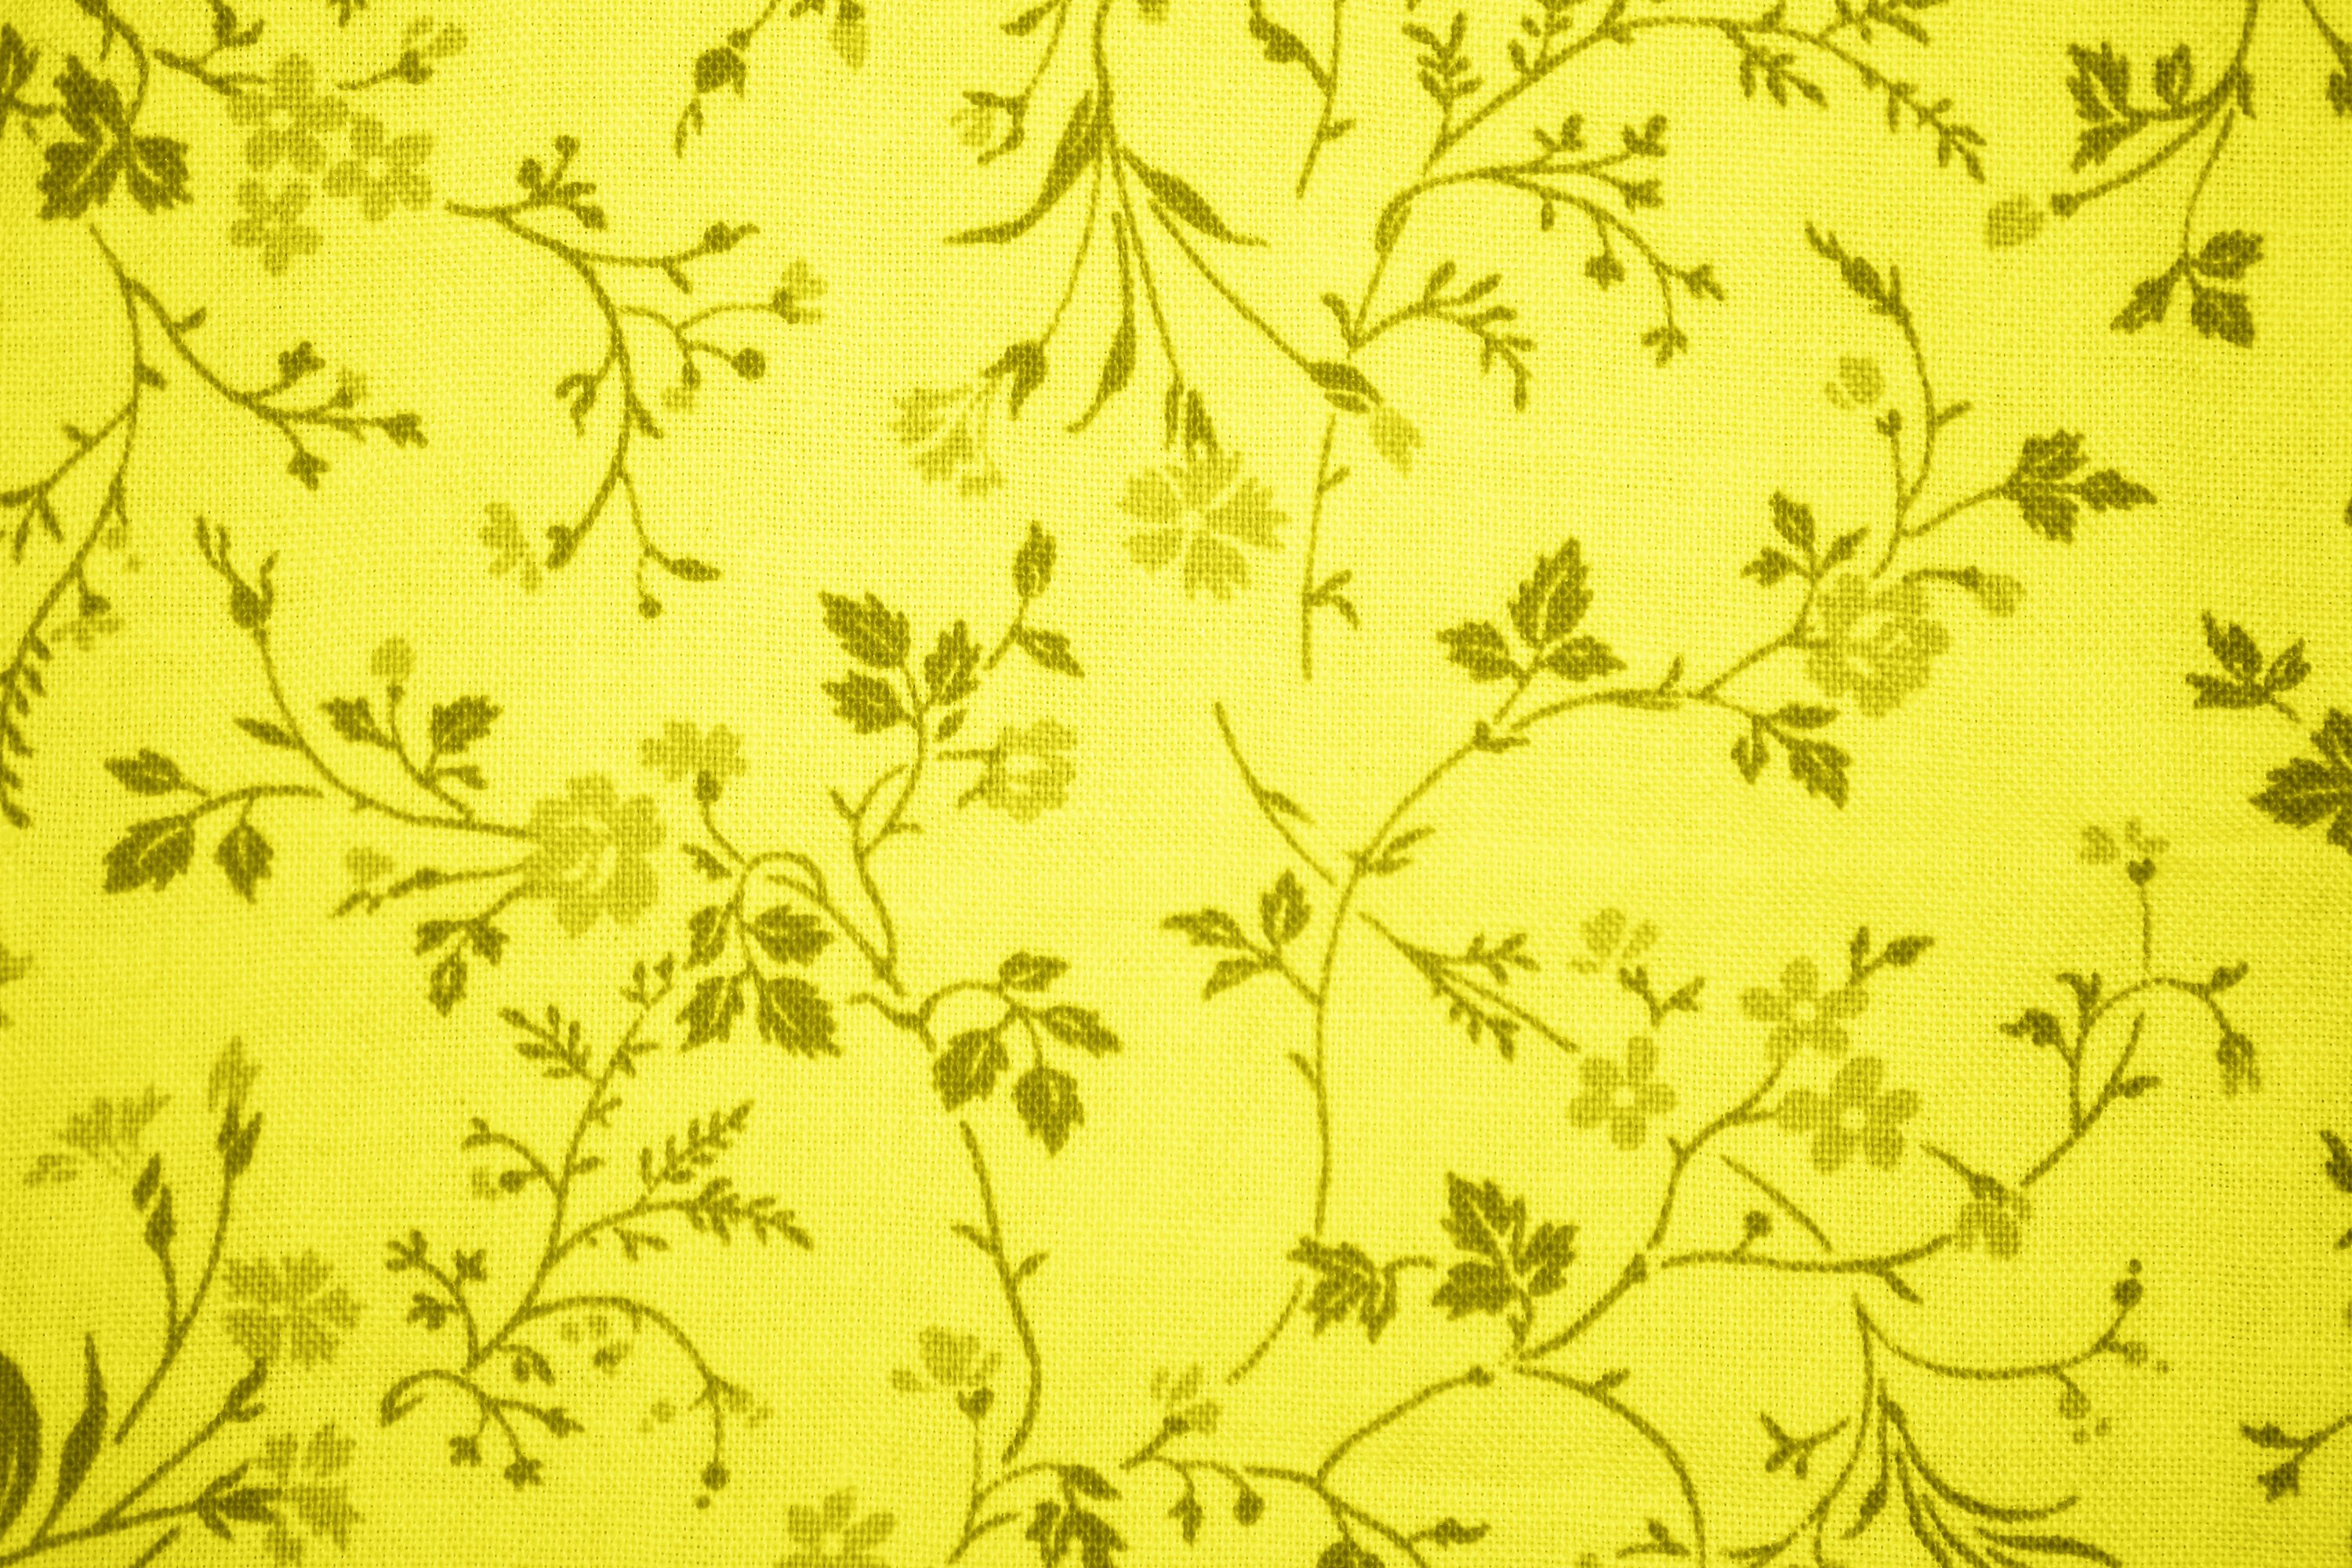 Yellow Floral Print Fabric Texture Picture Photograph Photos